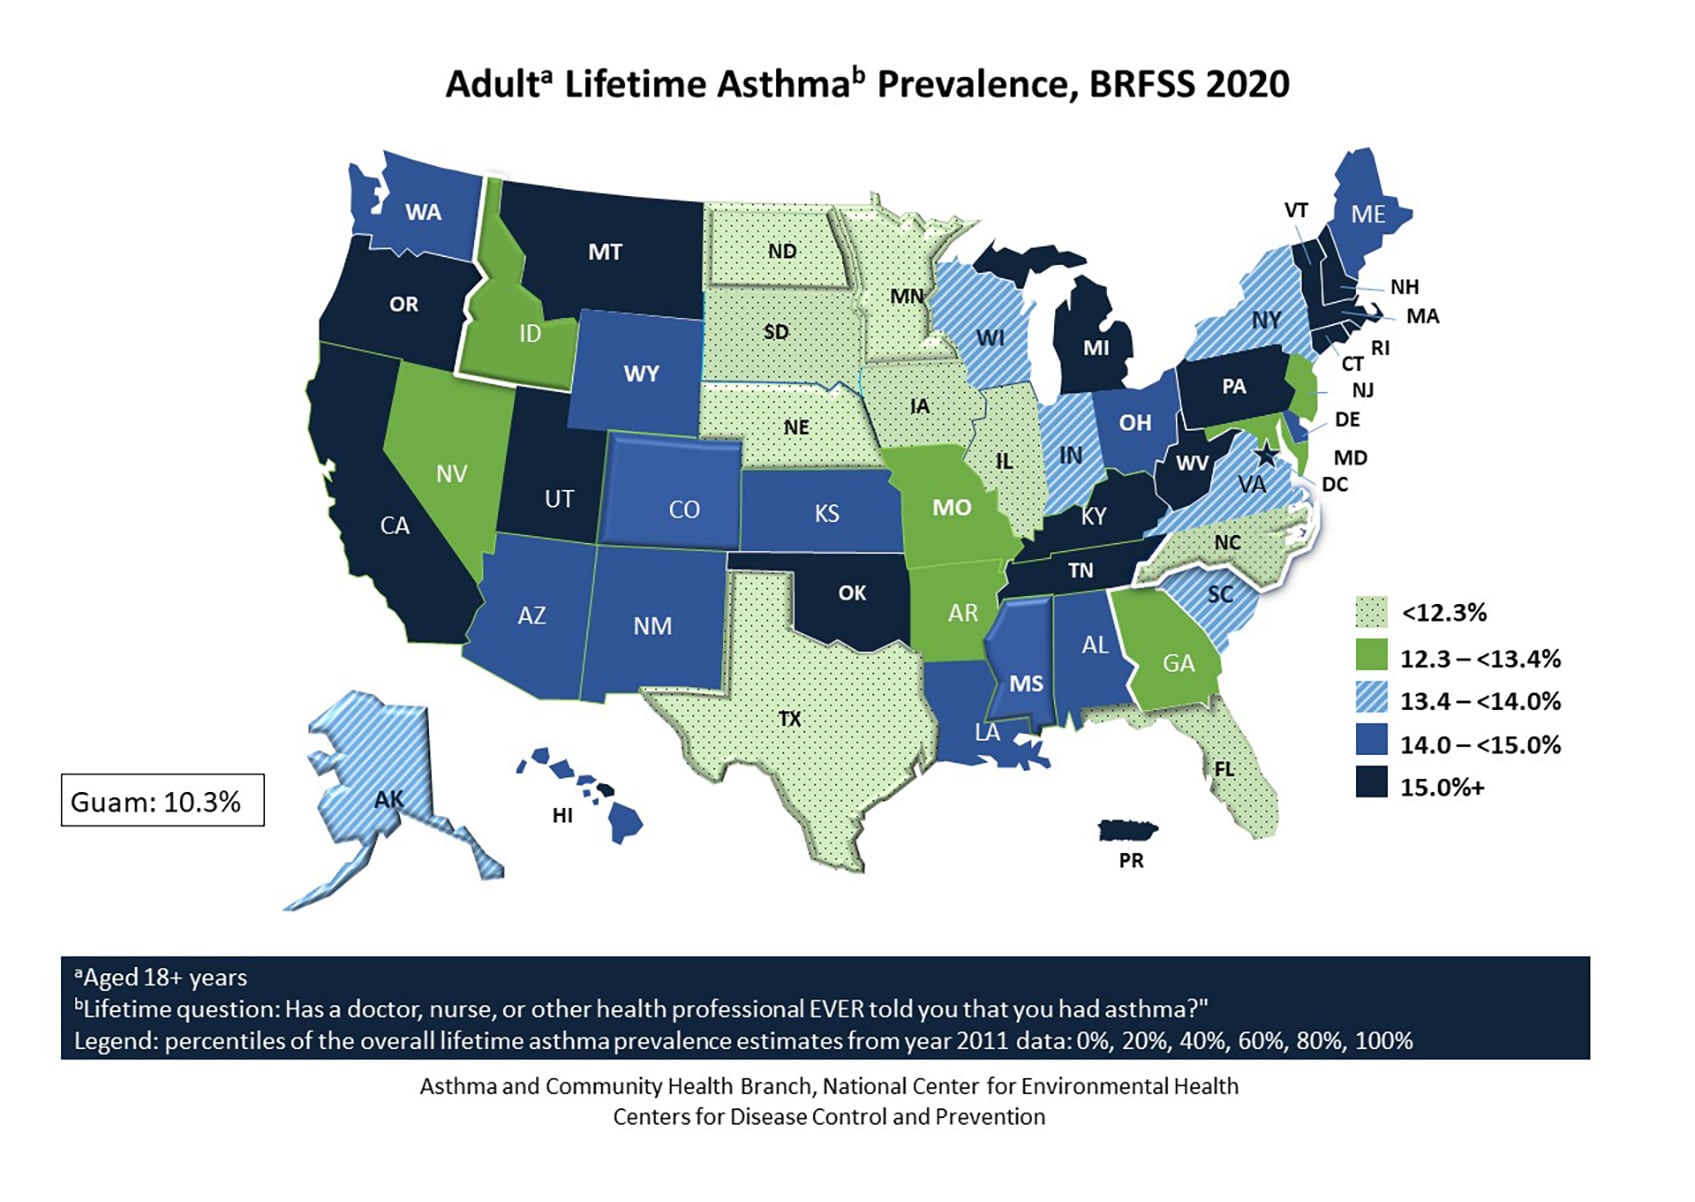 U.S. map showing adult self-reported lifetime asthma prevalence by state for BRFSS 2020